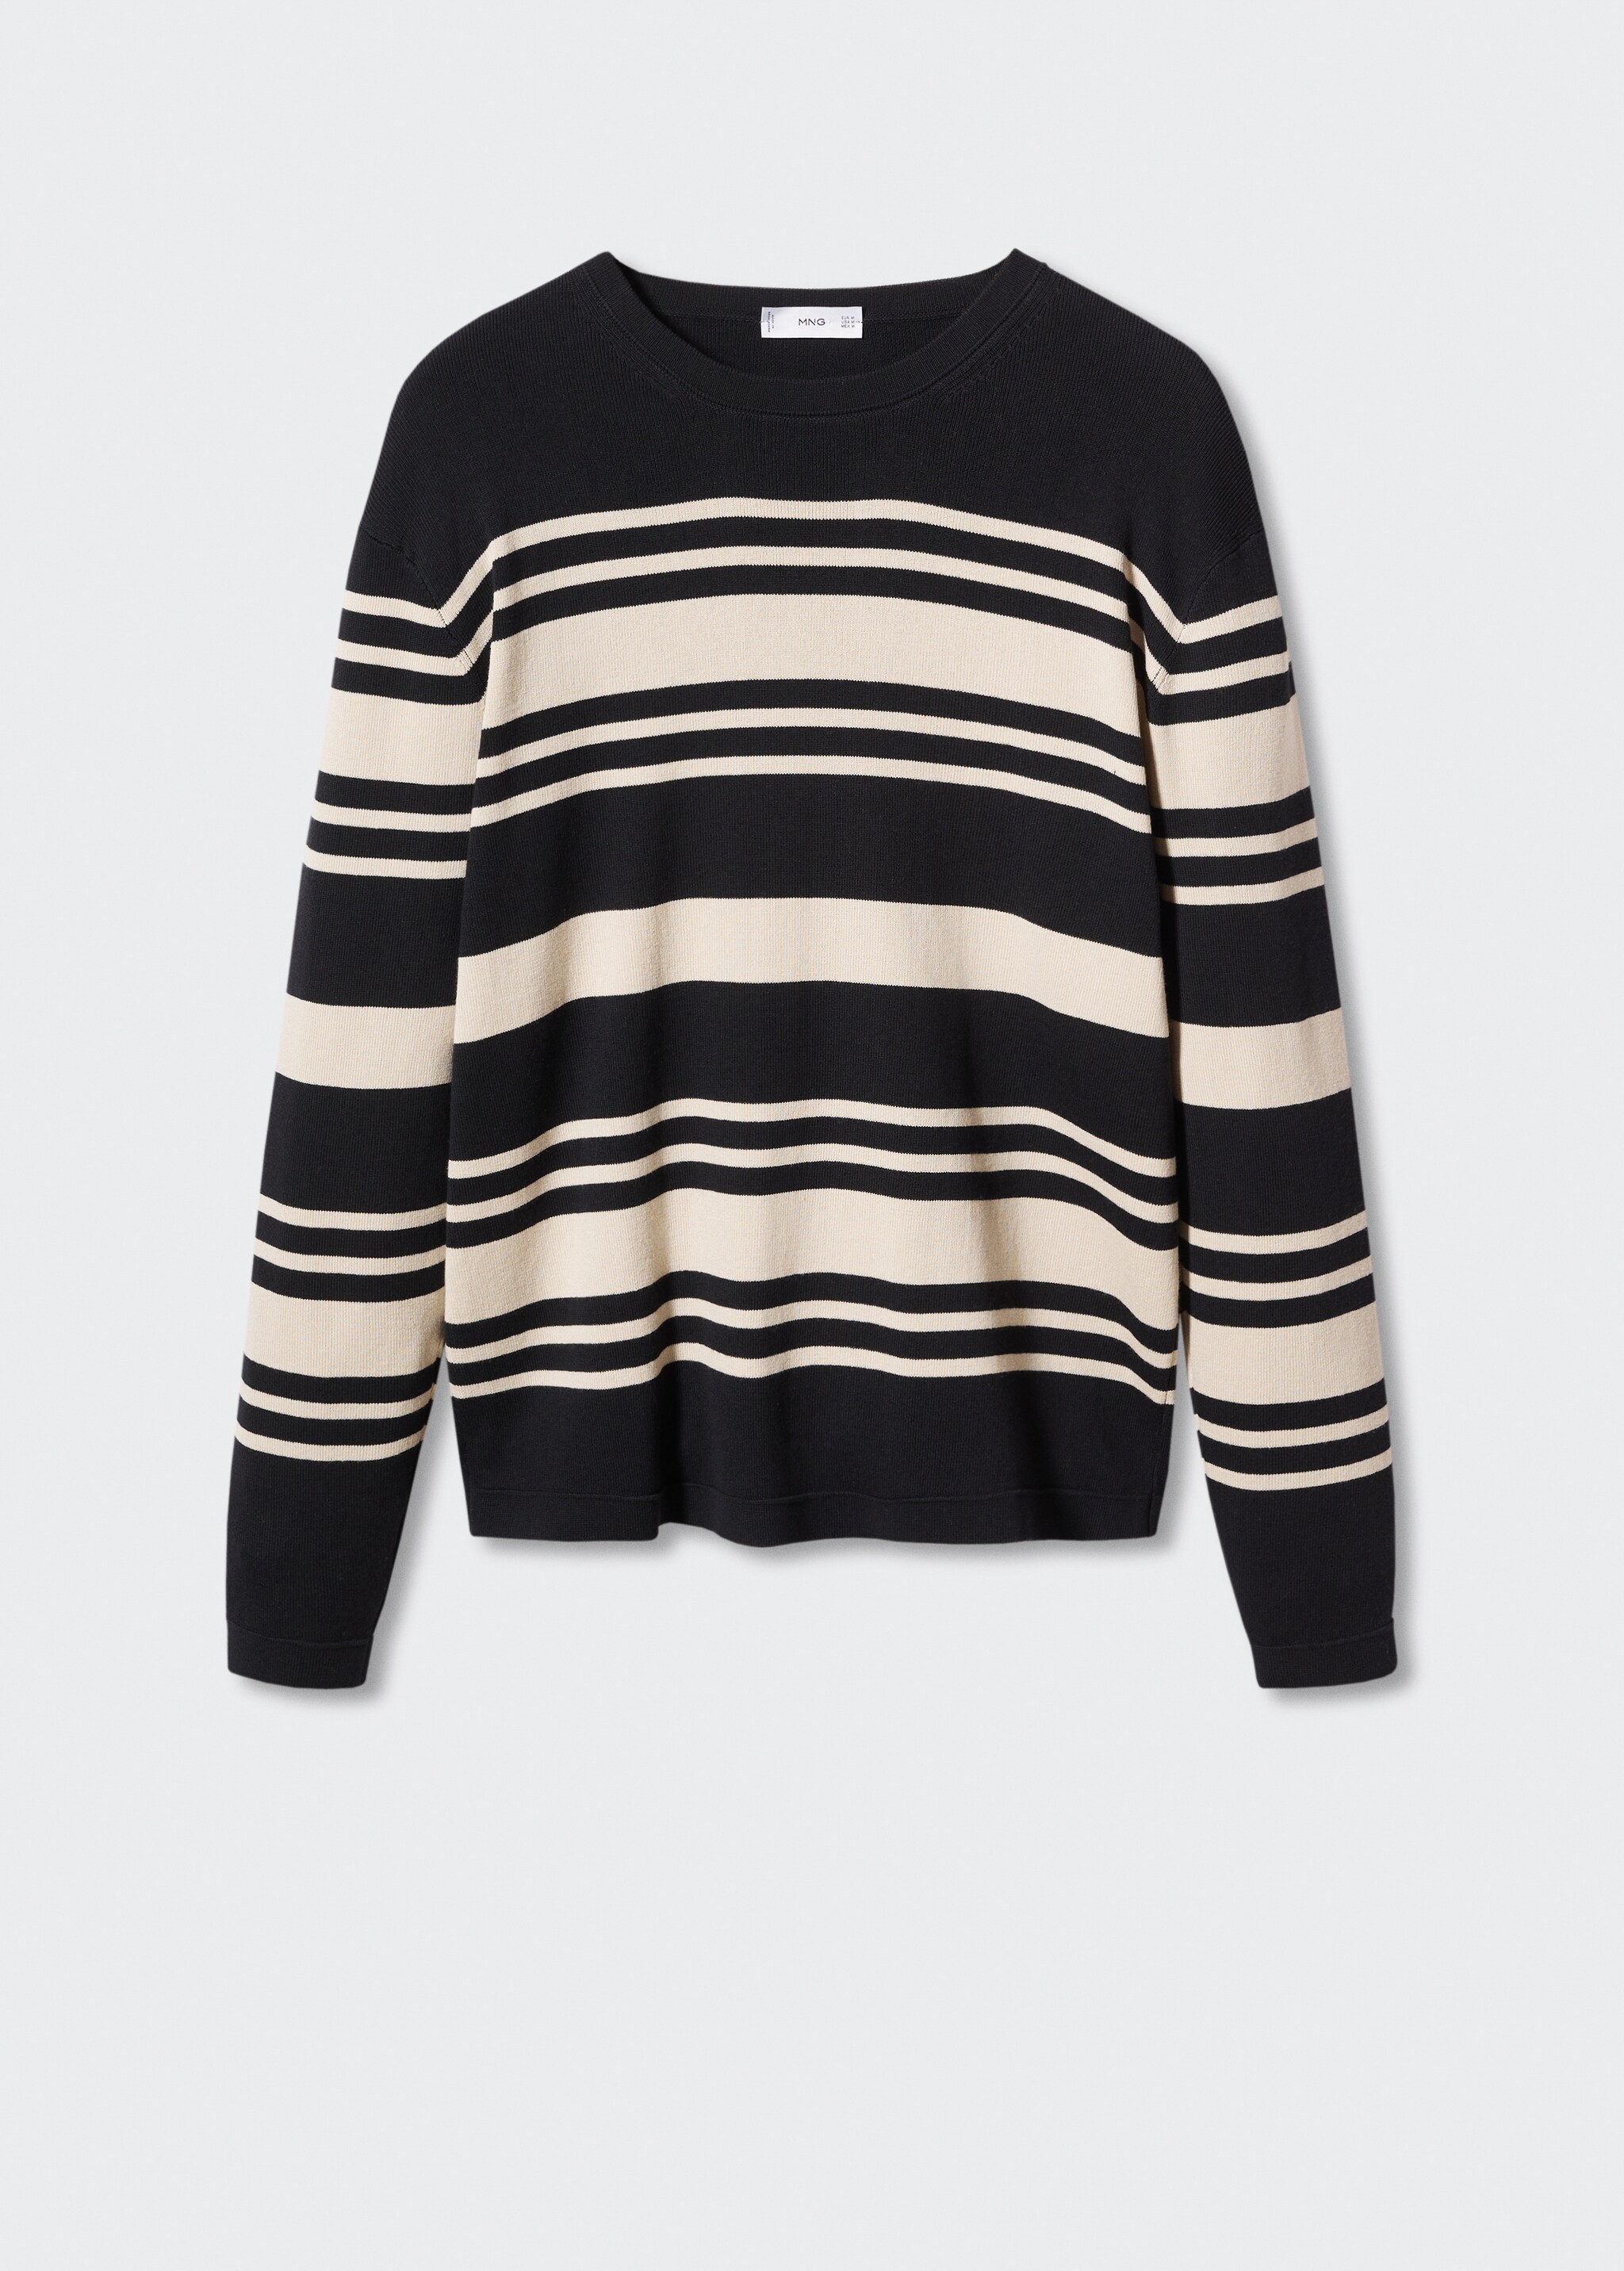 Striped cotton sweater - Article without model